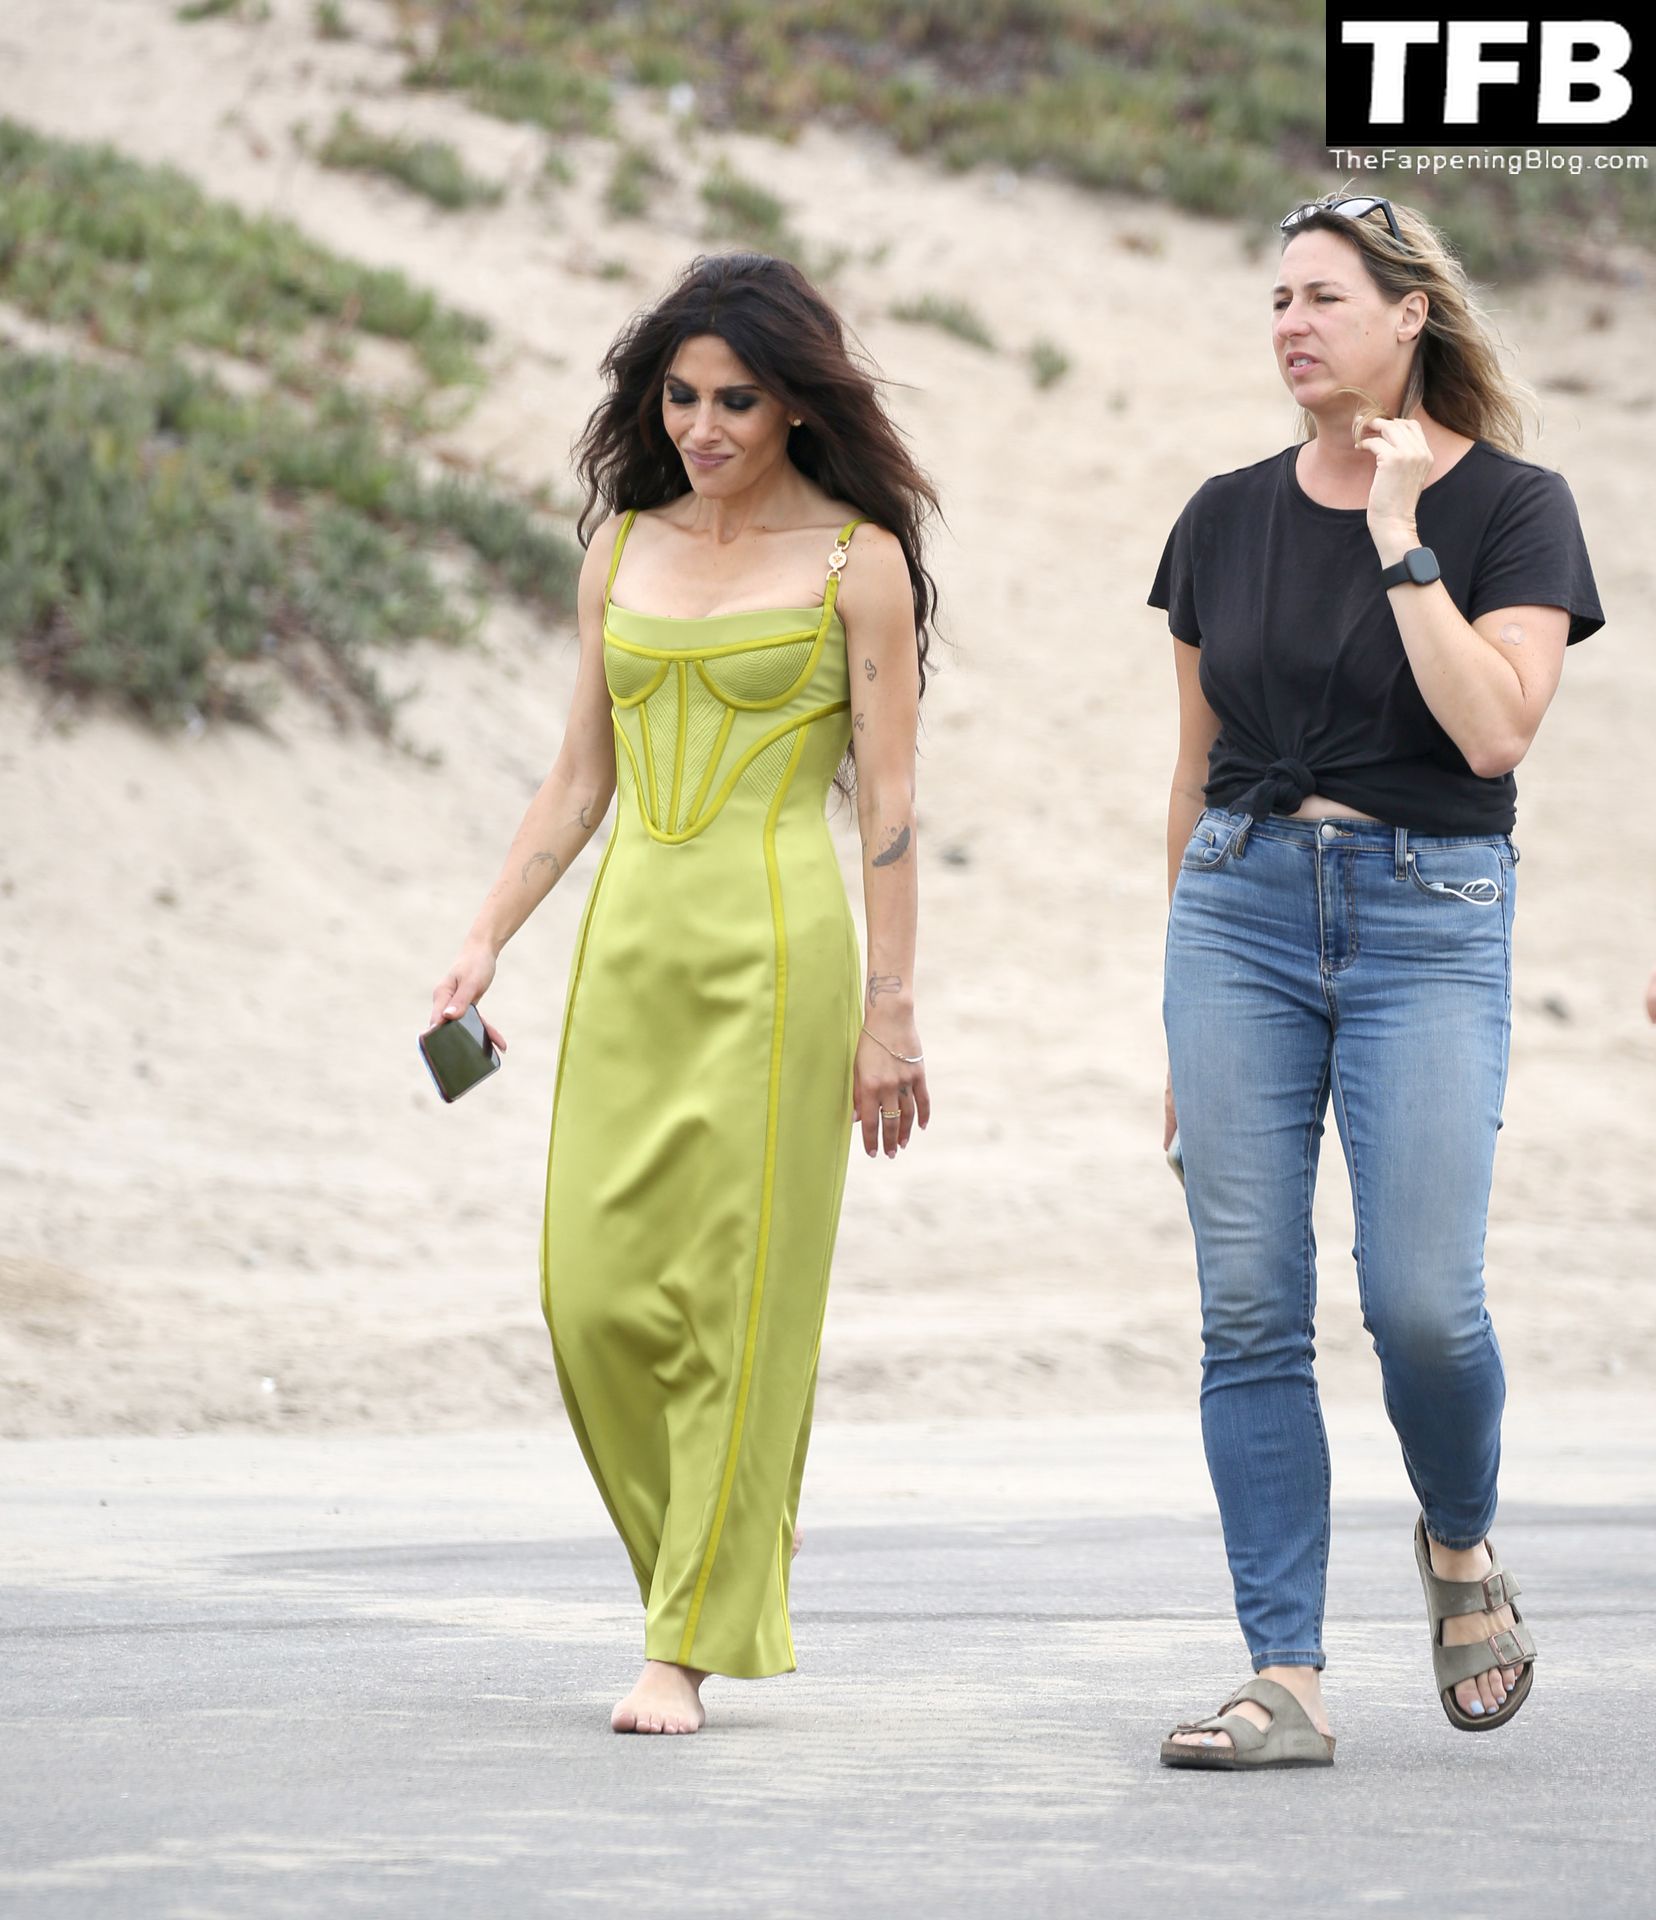 Sarah Shahi is Spotted During a Beach Shoot in LA (41 Photos)